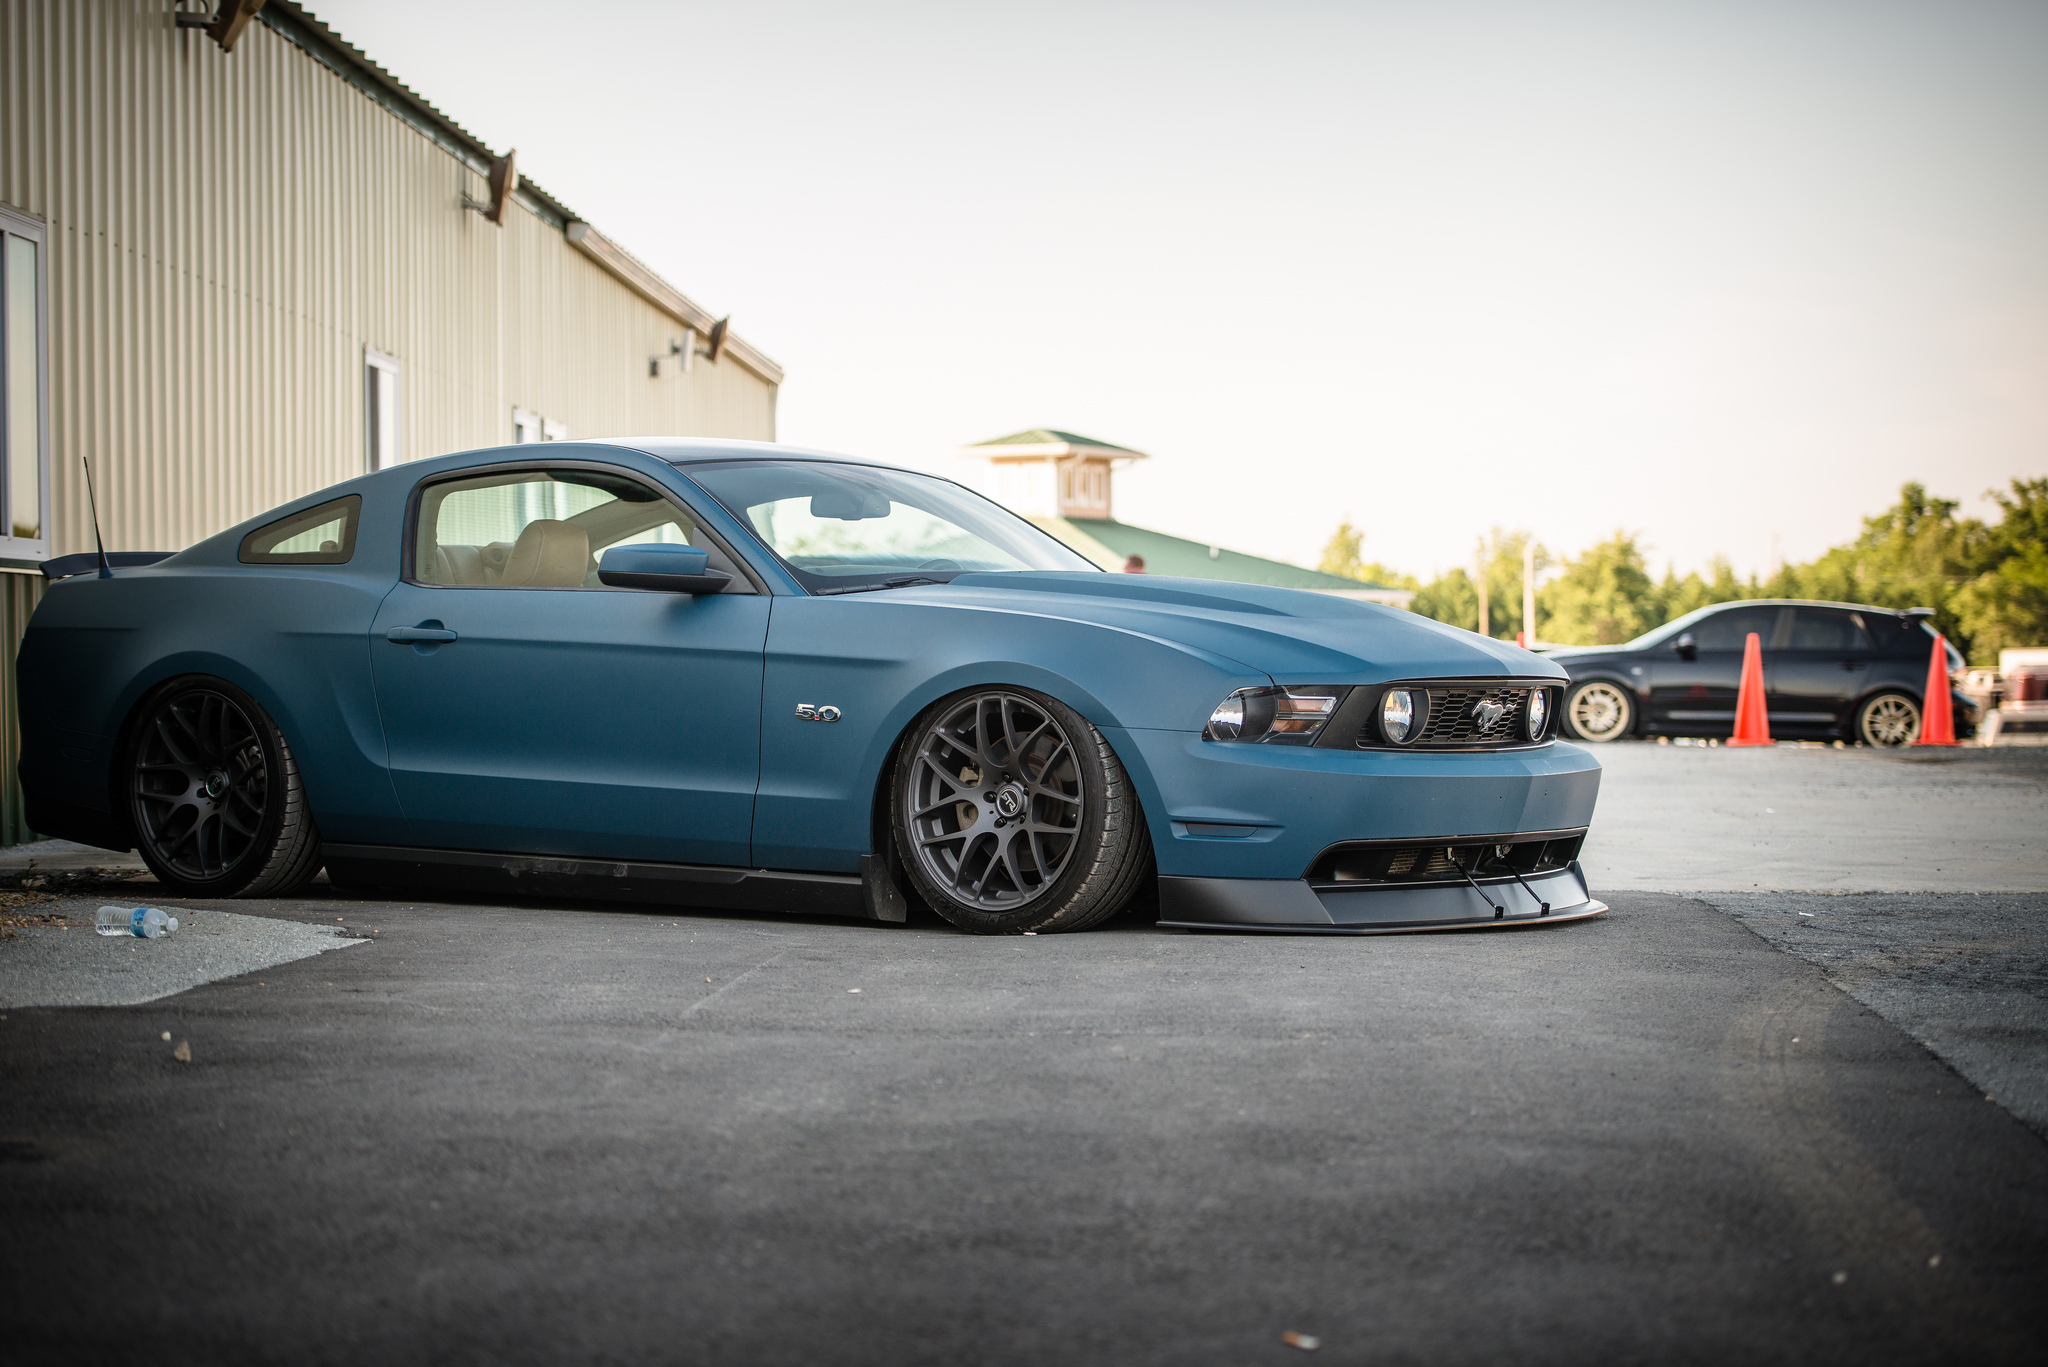 General 2048x1367 tuning low car Ford Mustang muscle cars car blue cars vehicle Ford Ford Mustang S-197 II American cars stanced